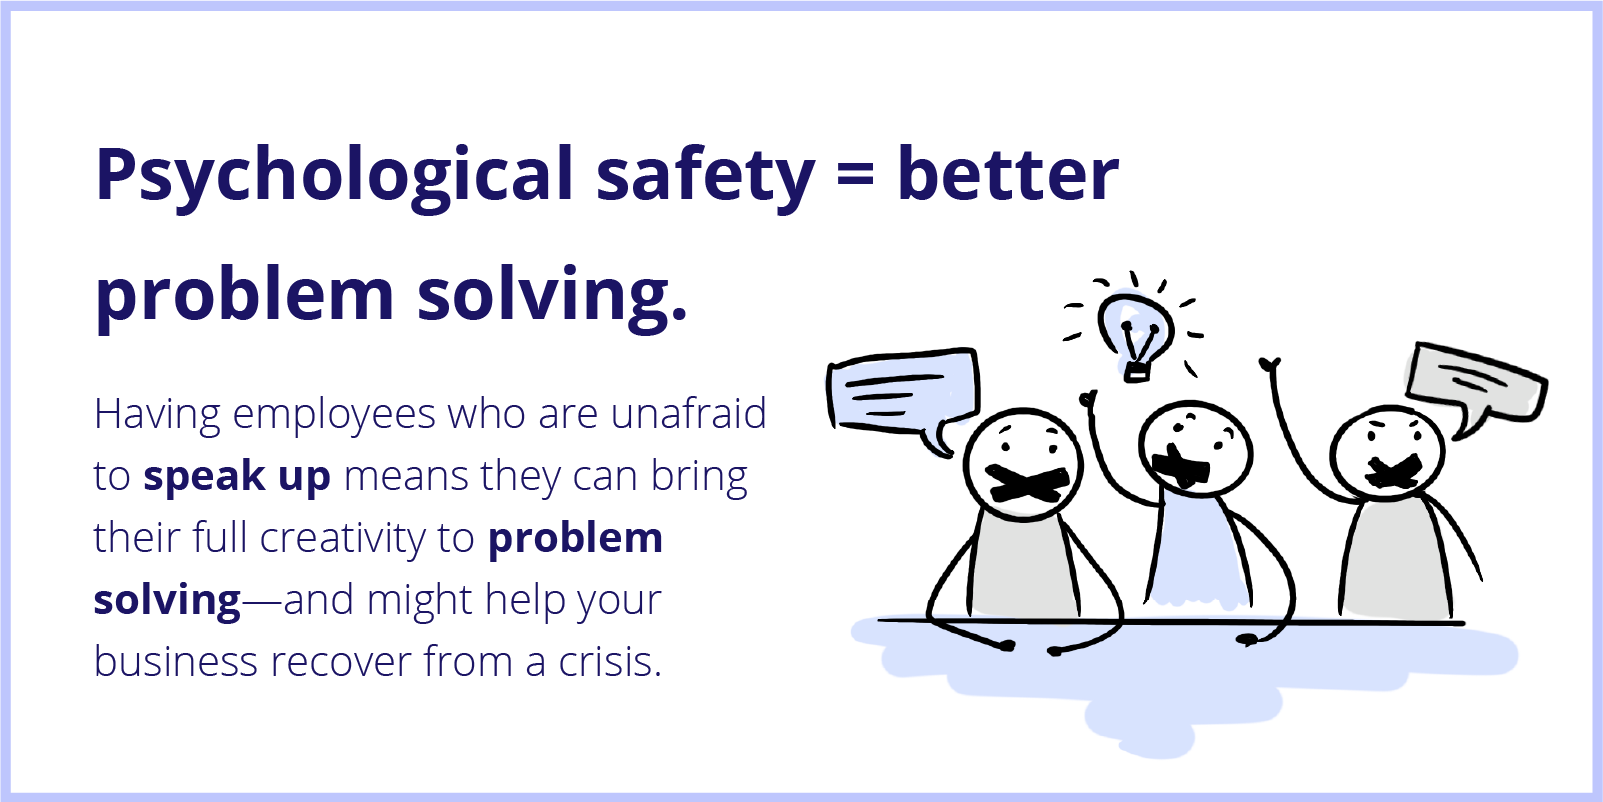 Text reading "Psychological Safety = Better problem solving. Having employees who are unafraid to speak up means they can bring their full creativity to problem solving and might help your business recover from a crisis." 